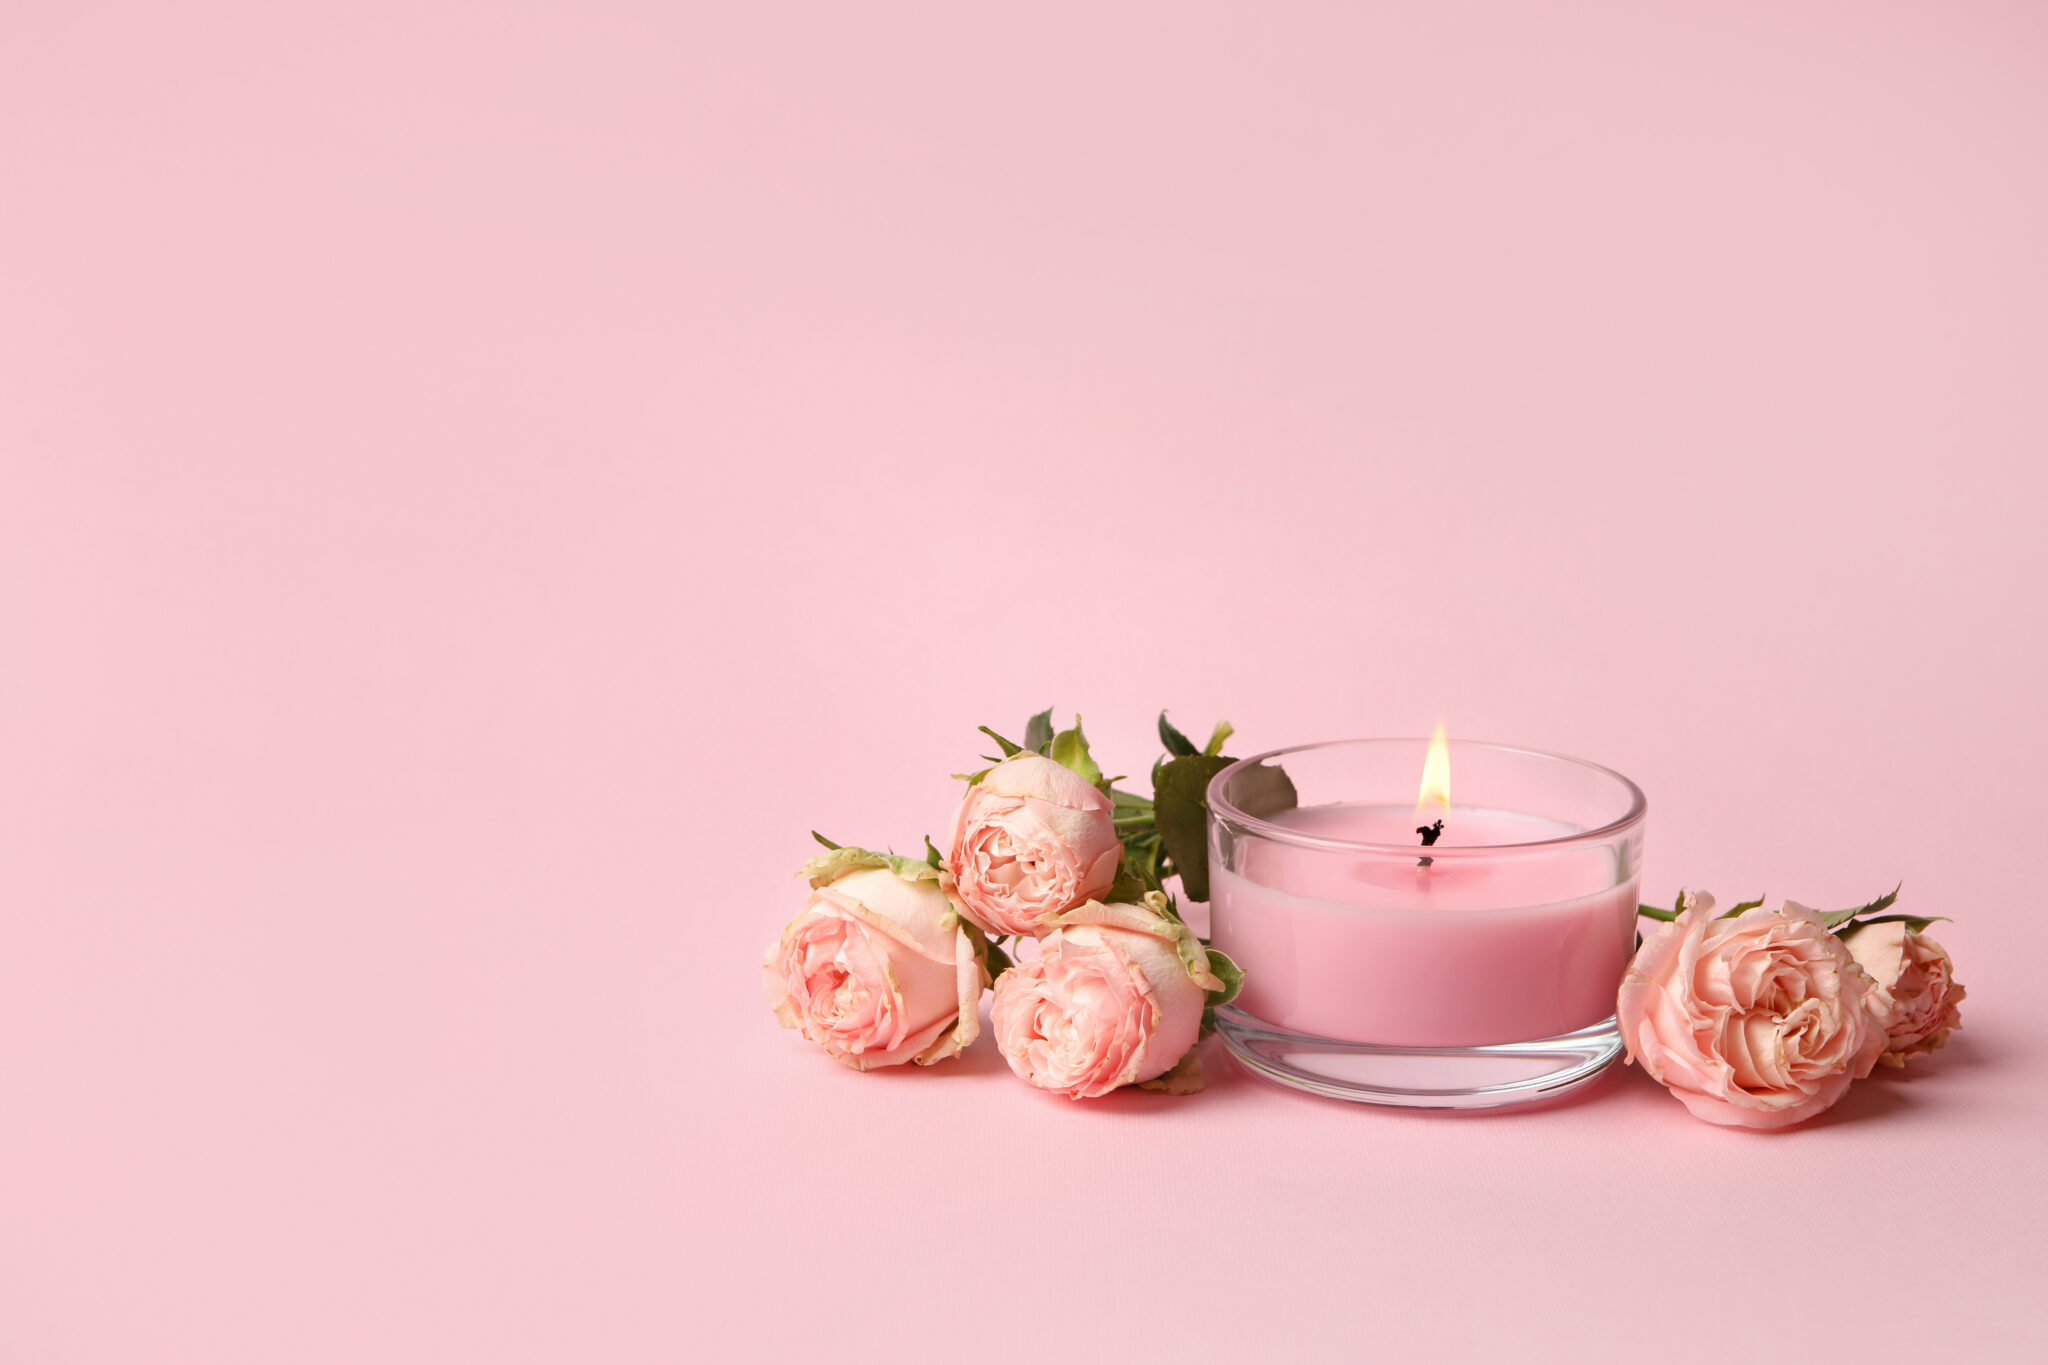 Scented Candle And Roses On Pink Background